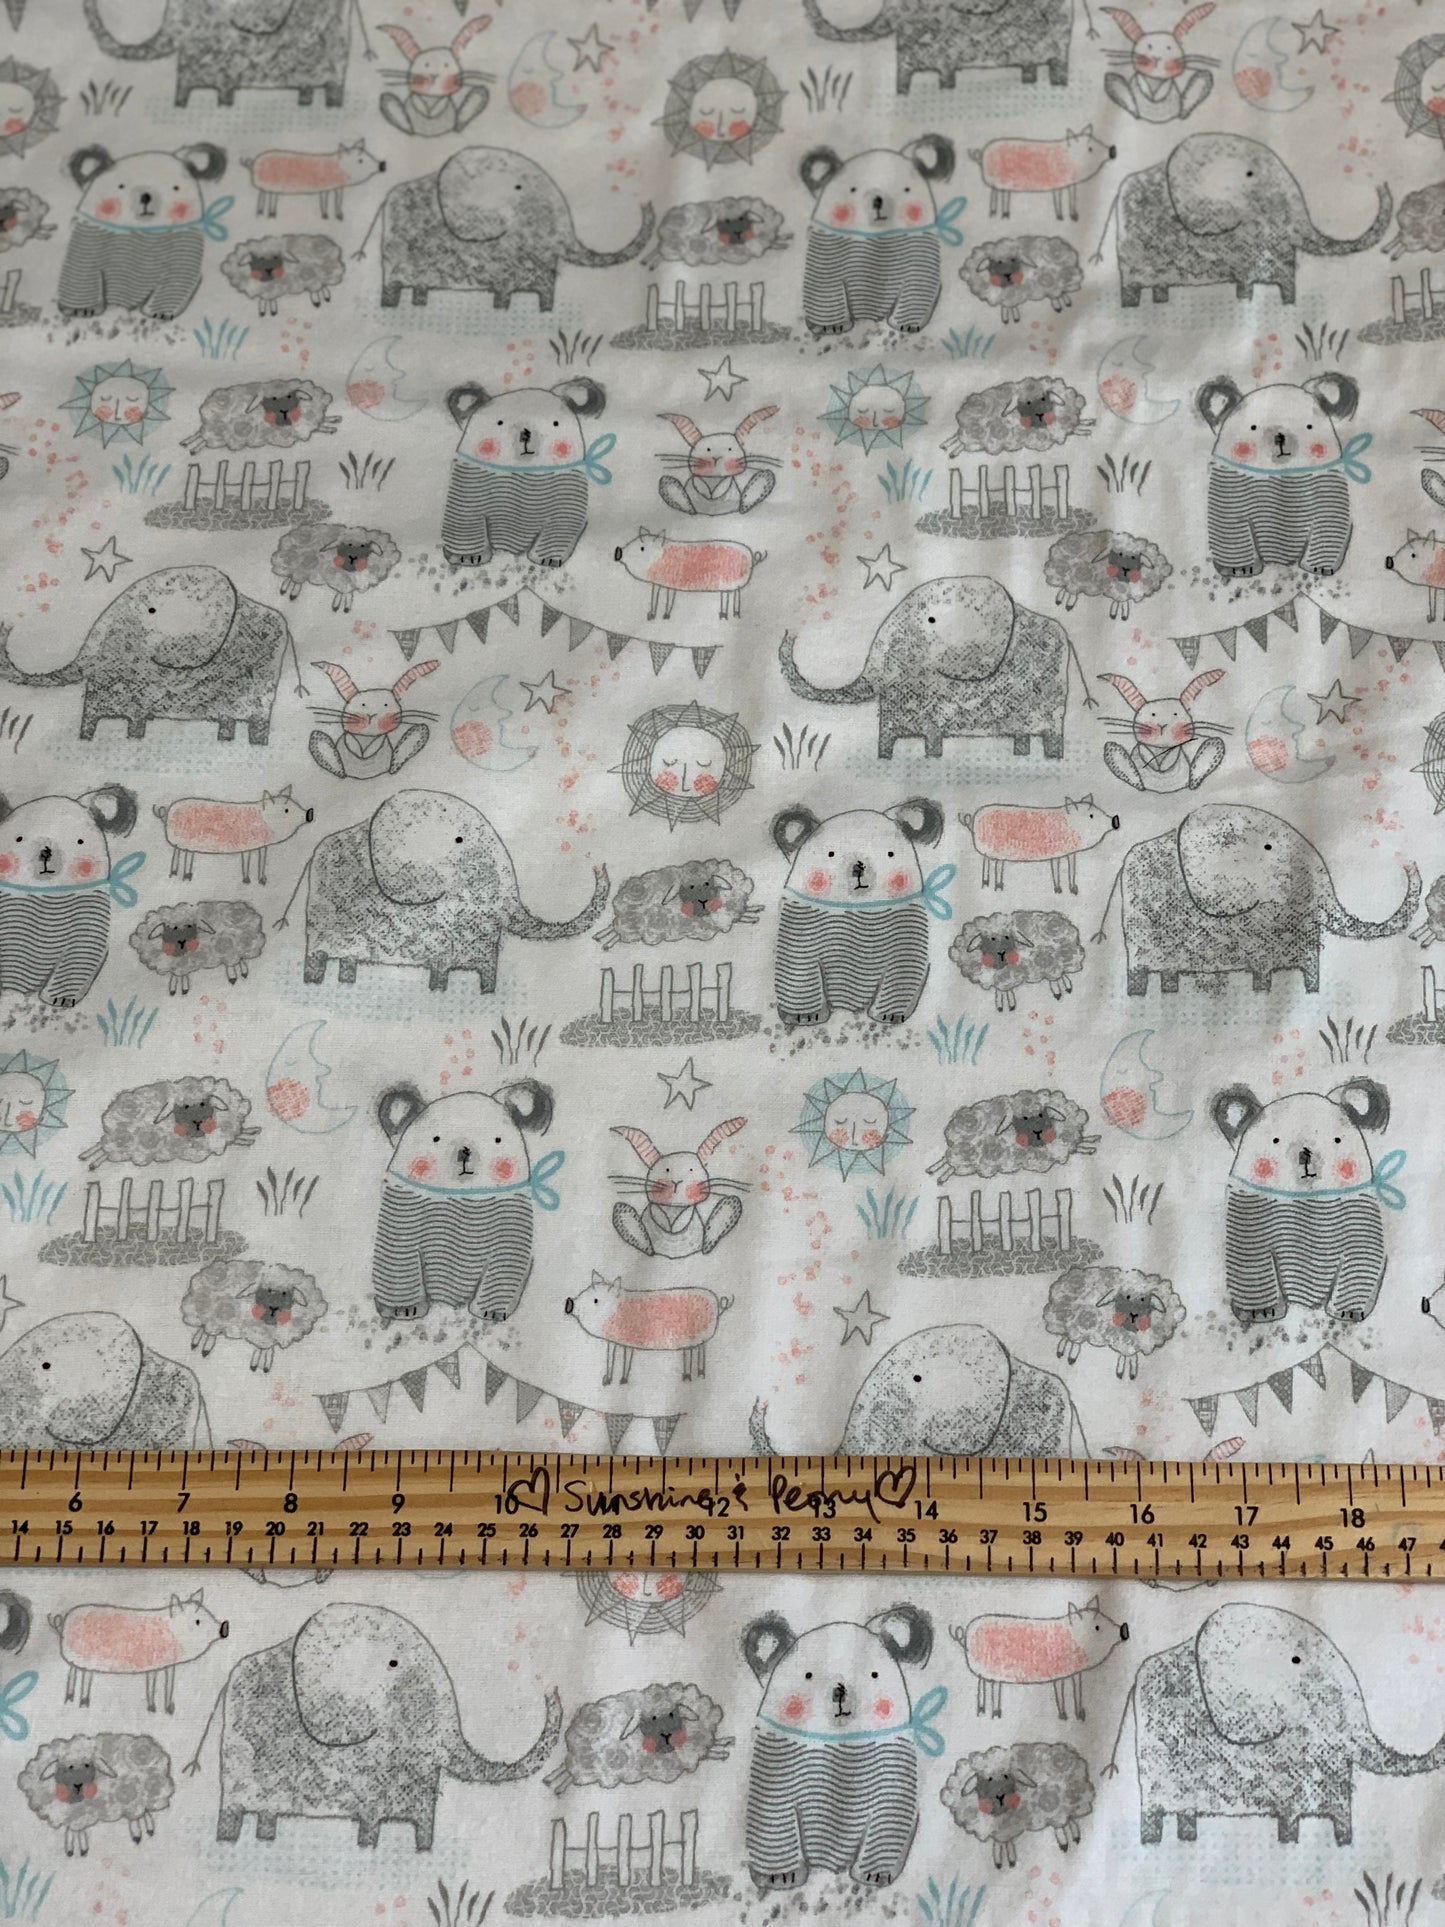 Coming Back in stock soon - Flannel - Comfy Flannel - White Elephant, Bear, Pigs, Bunny & Sheep